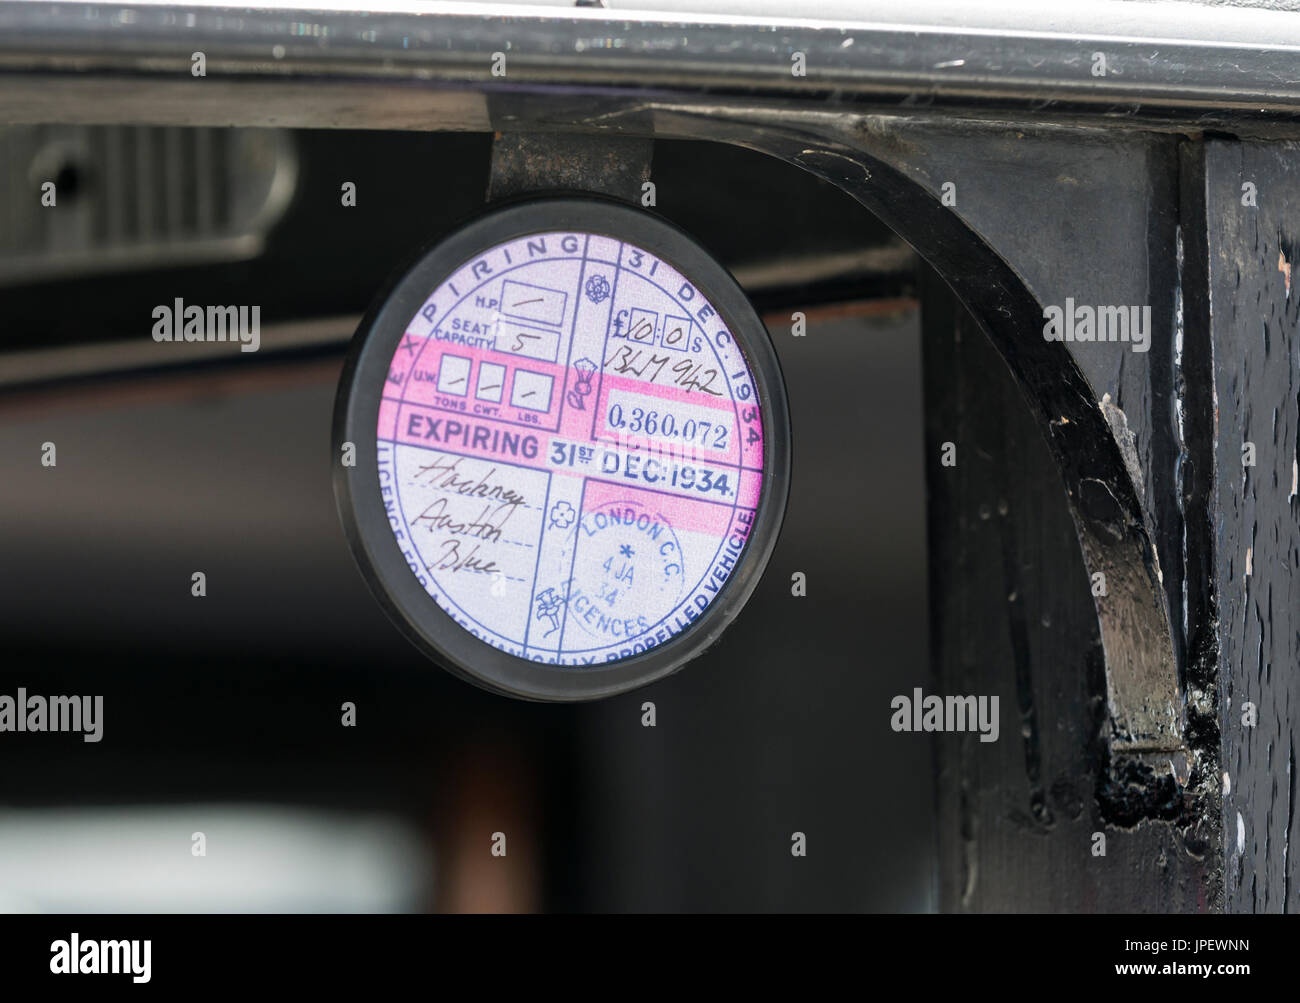 Expired 1930s road tax disc fitted to a vintage Austin 12/4 London taxicab in the UK. Stock Photo